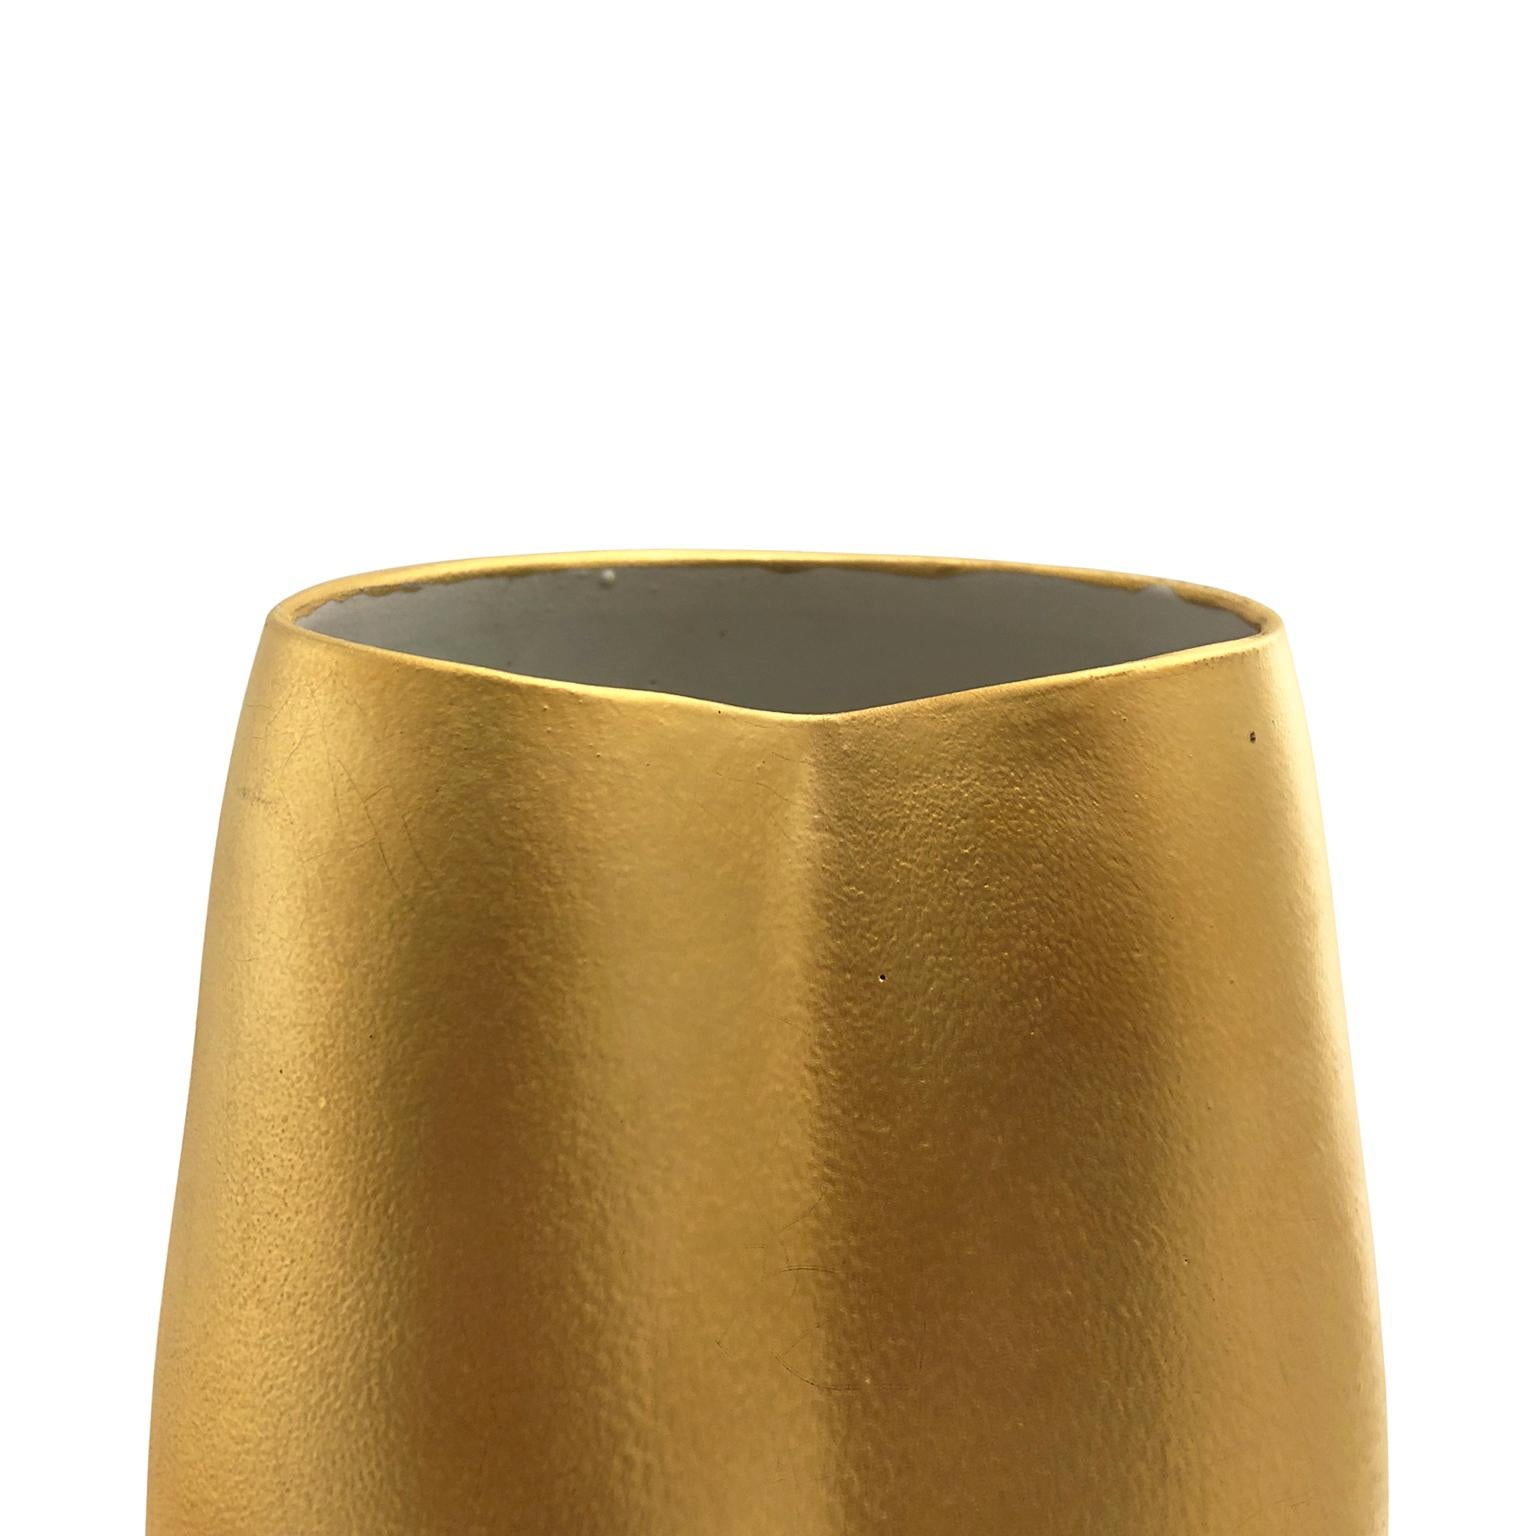 Wide mouth ceramic vase with dent in 22-karat matte crackle gold glaze by Sandi Fellman, 2019.

Veteran photographer Sandi Fellman's ceramic vessels are an exploration of a new medium. The forms, palettes, and sensuality of her photos can be found